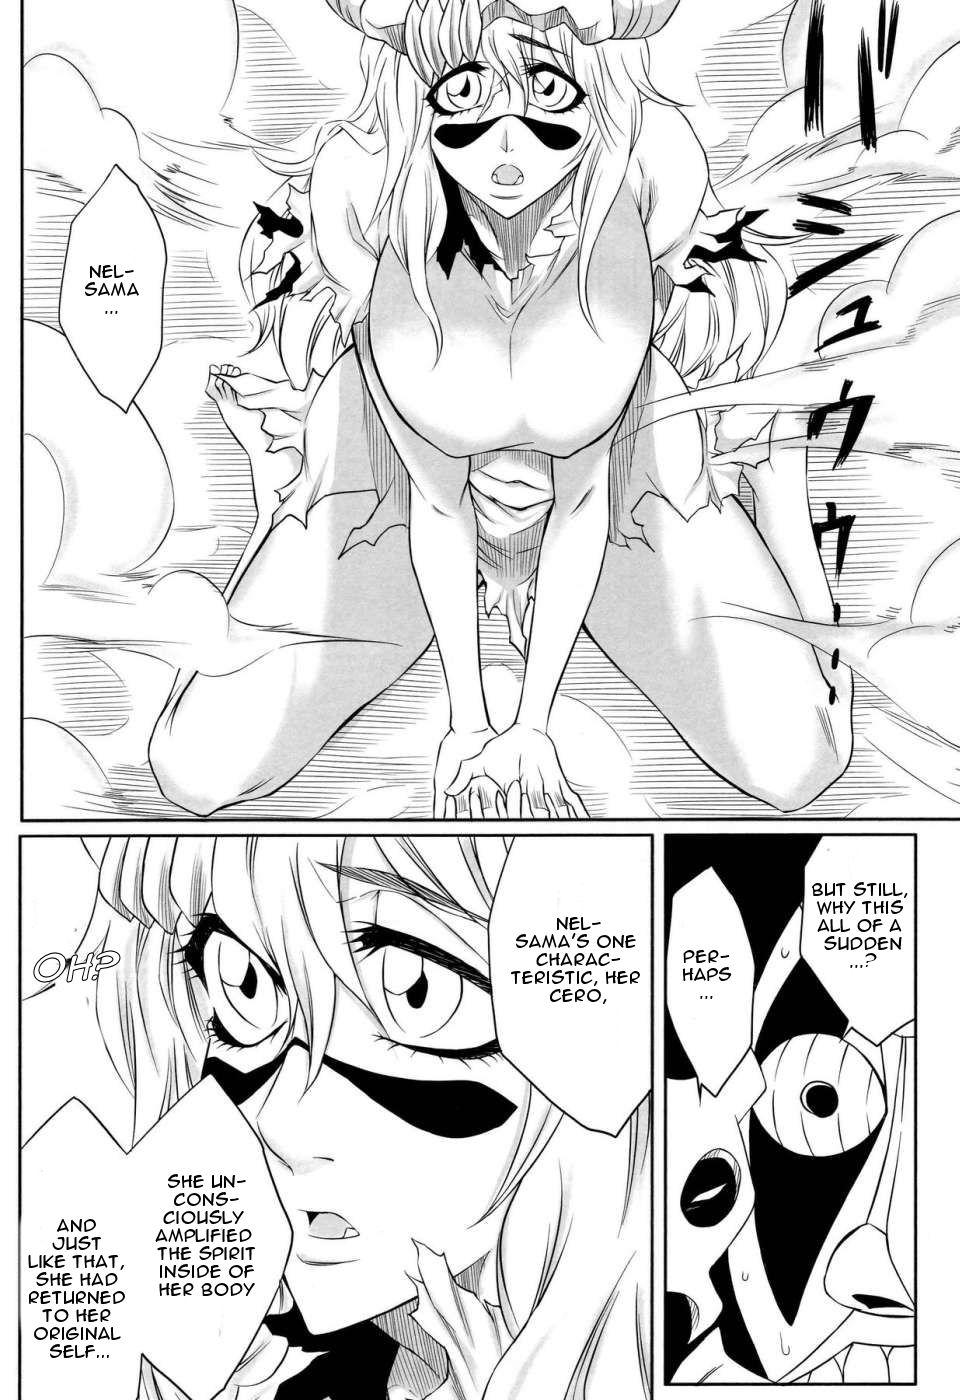 Japan Nel - Bleach Jacking Off - Page 5